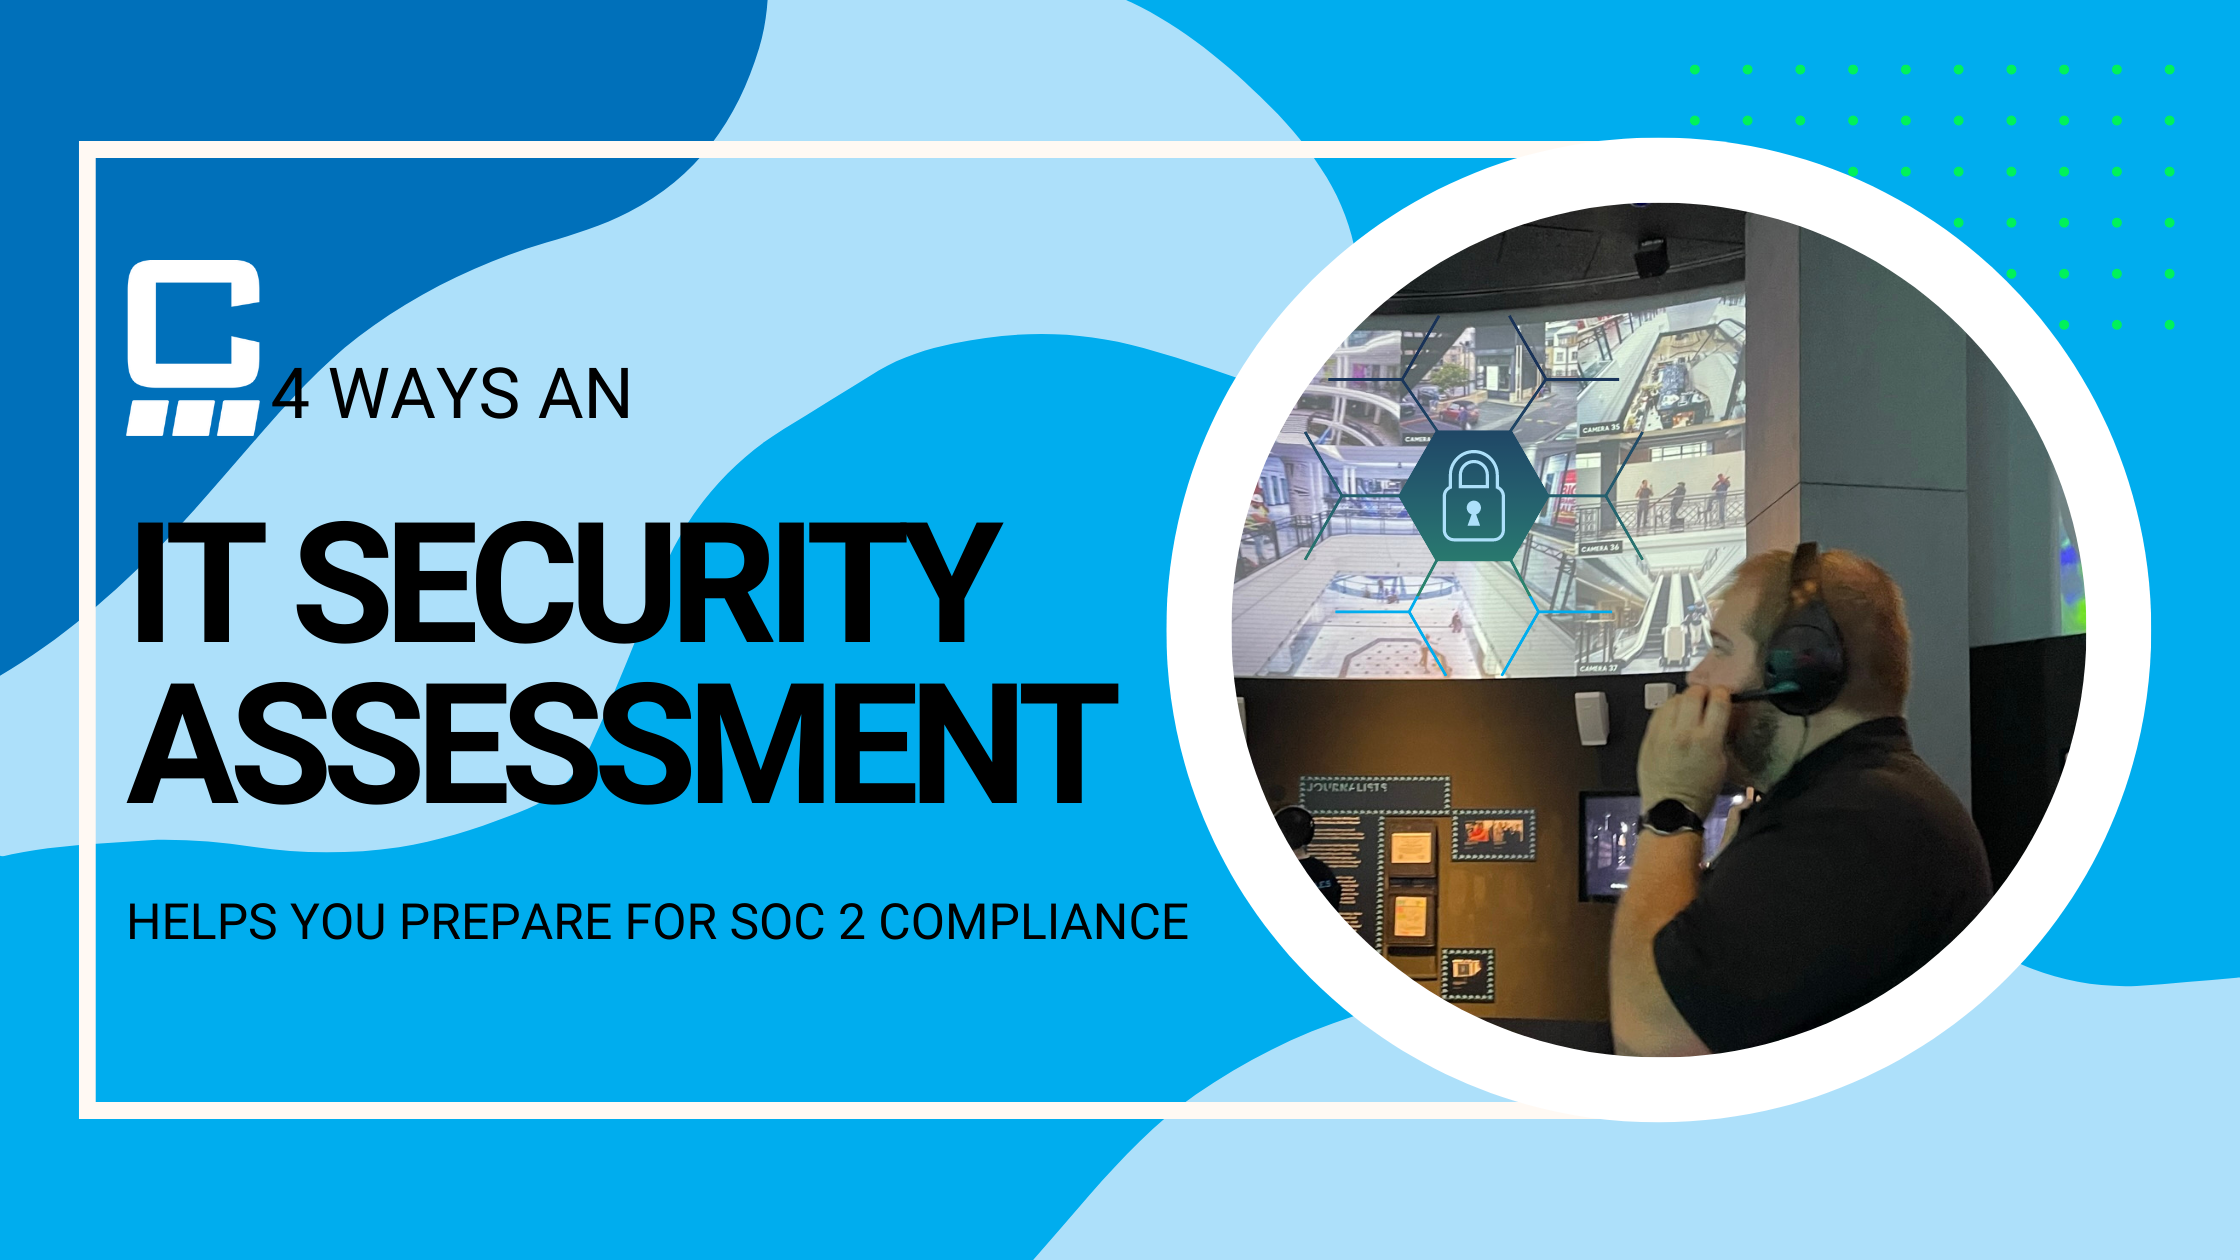 4 Ways An IT Security Assessment Prepares You For SOC 2 Compliance